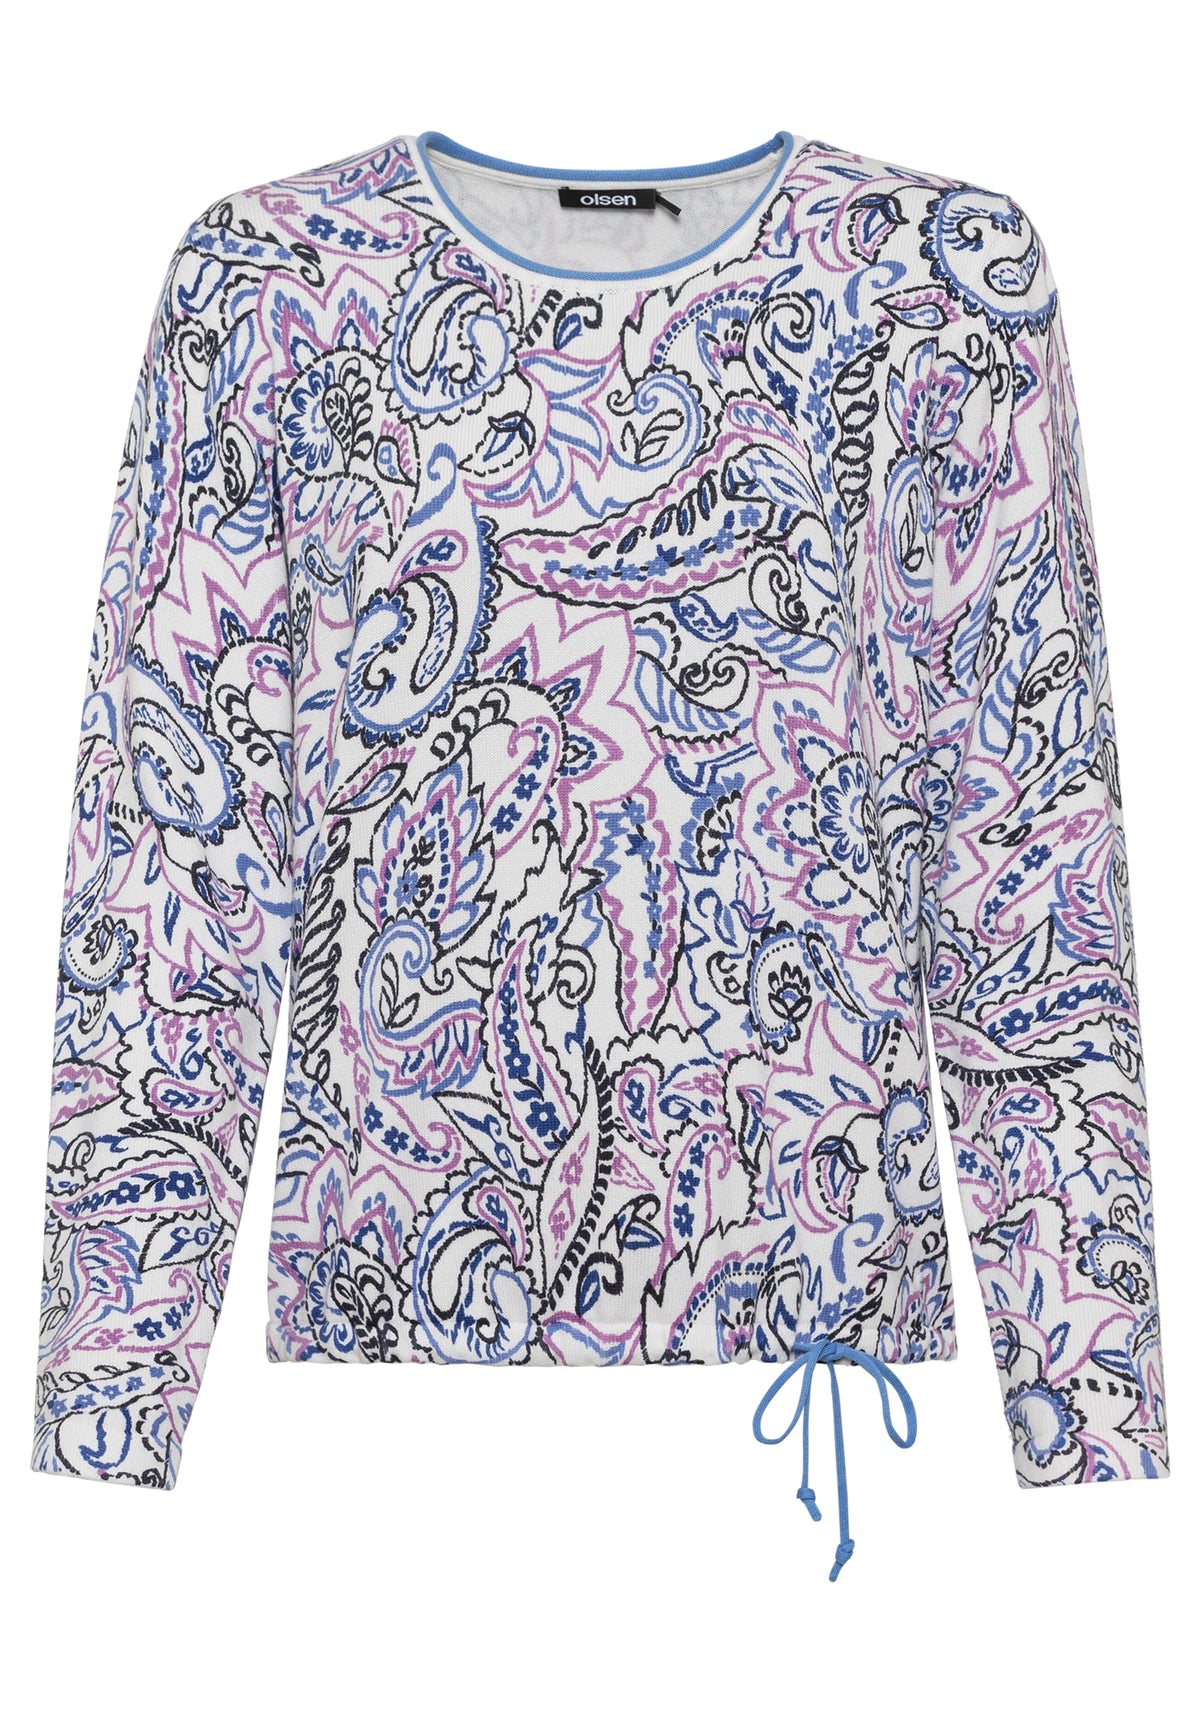 100% Cotton Long Sleeve Allover Paisley Motif Sweater